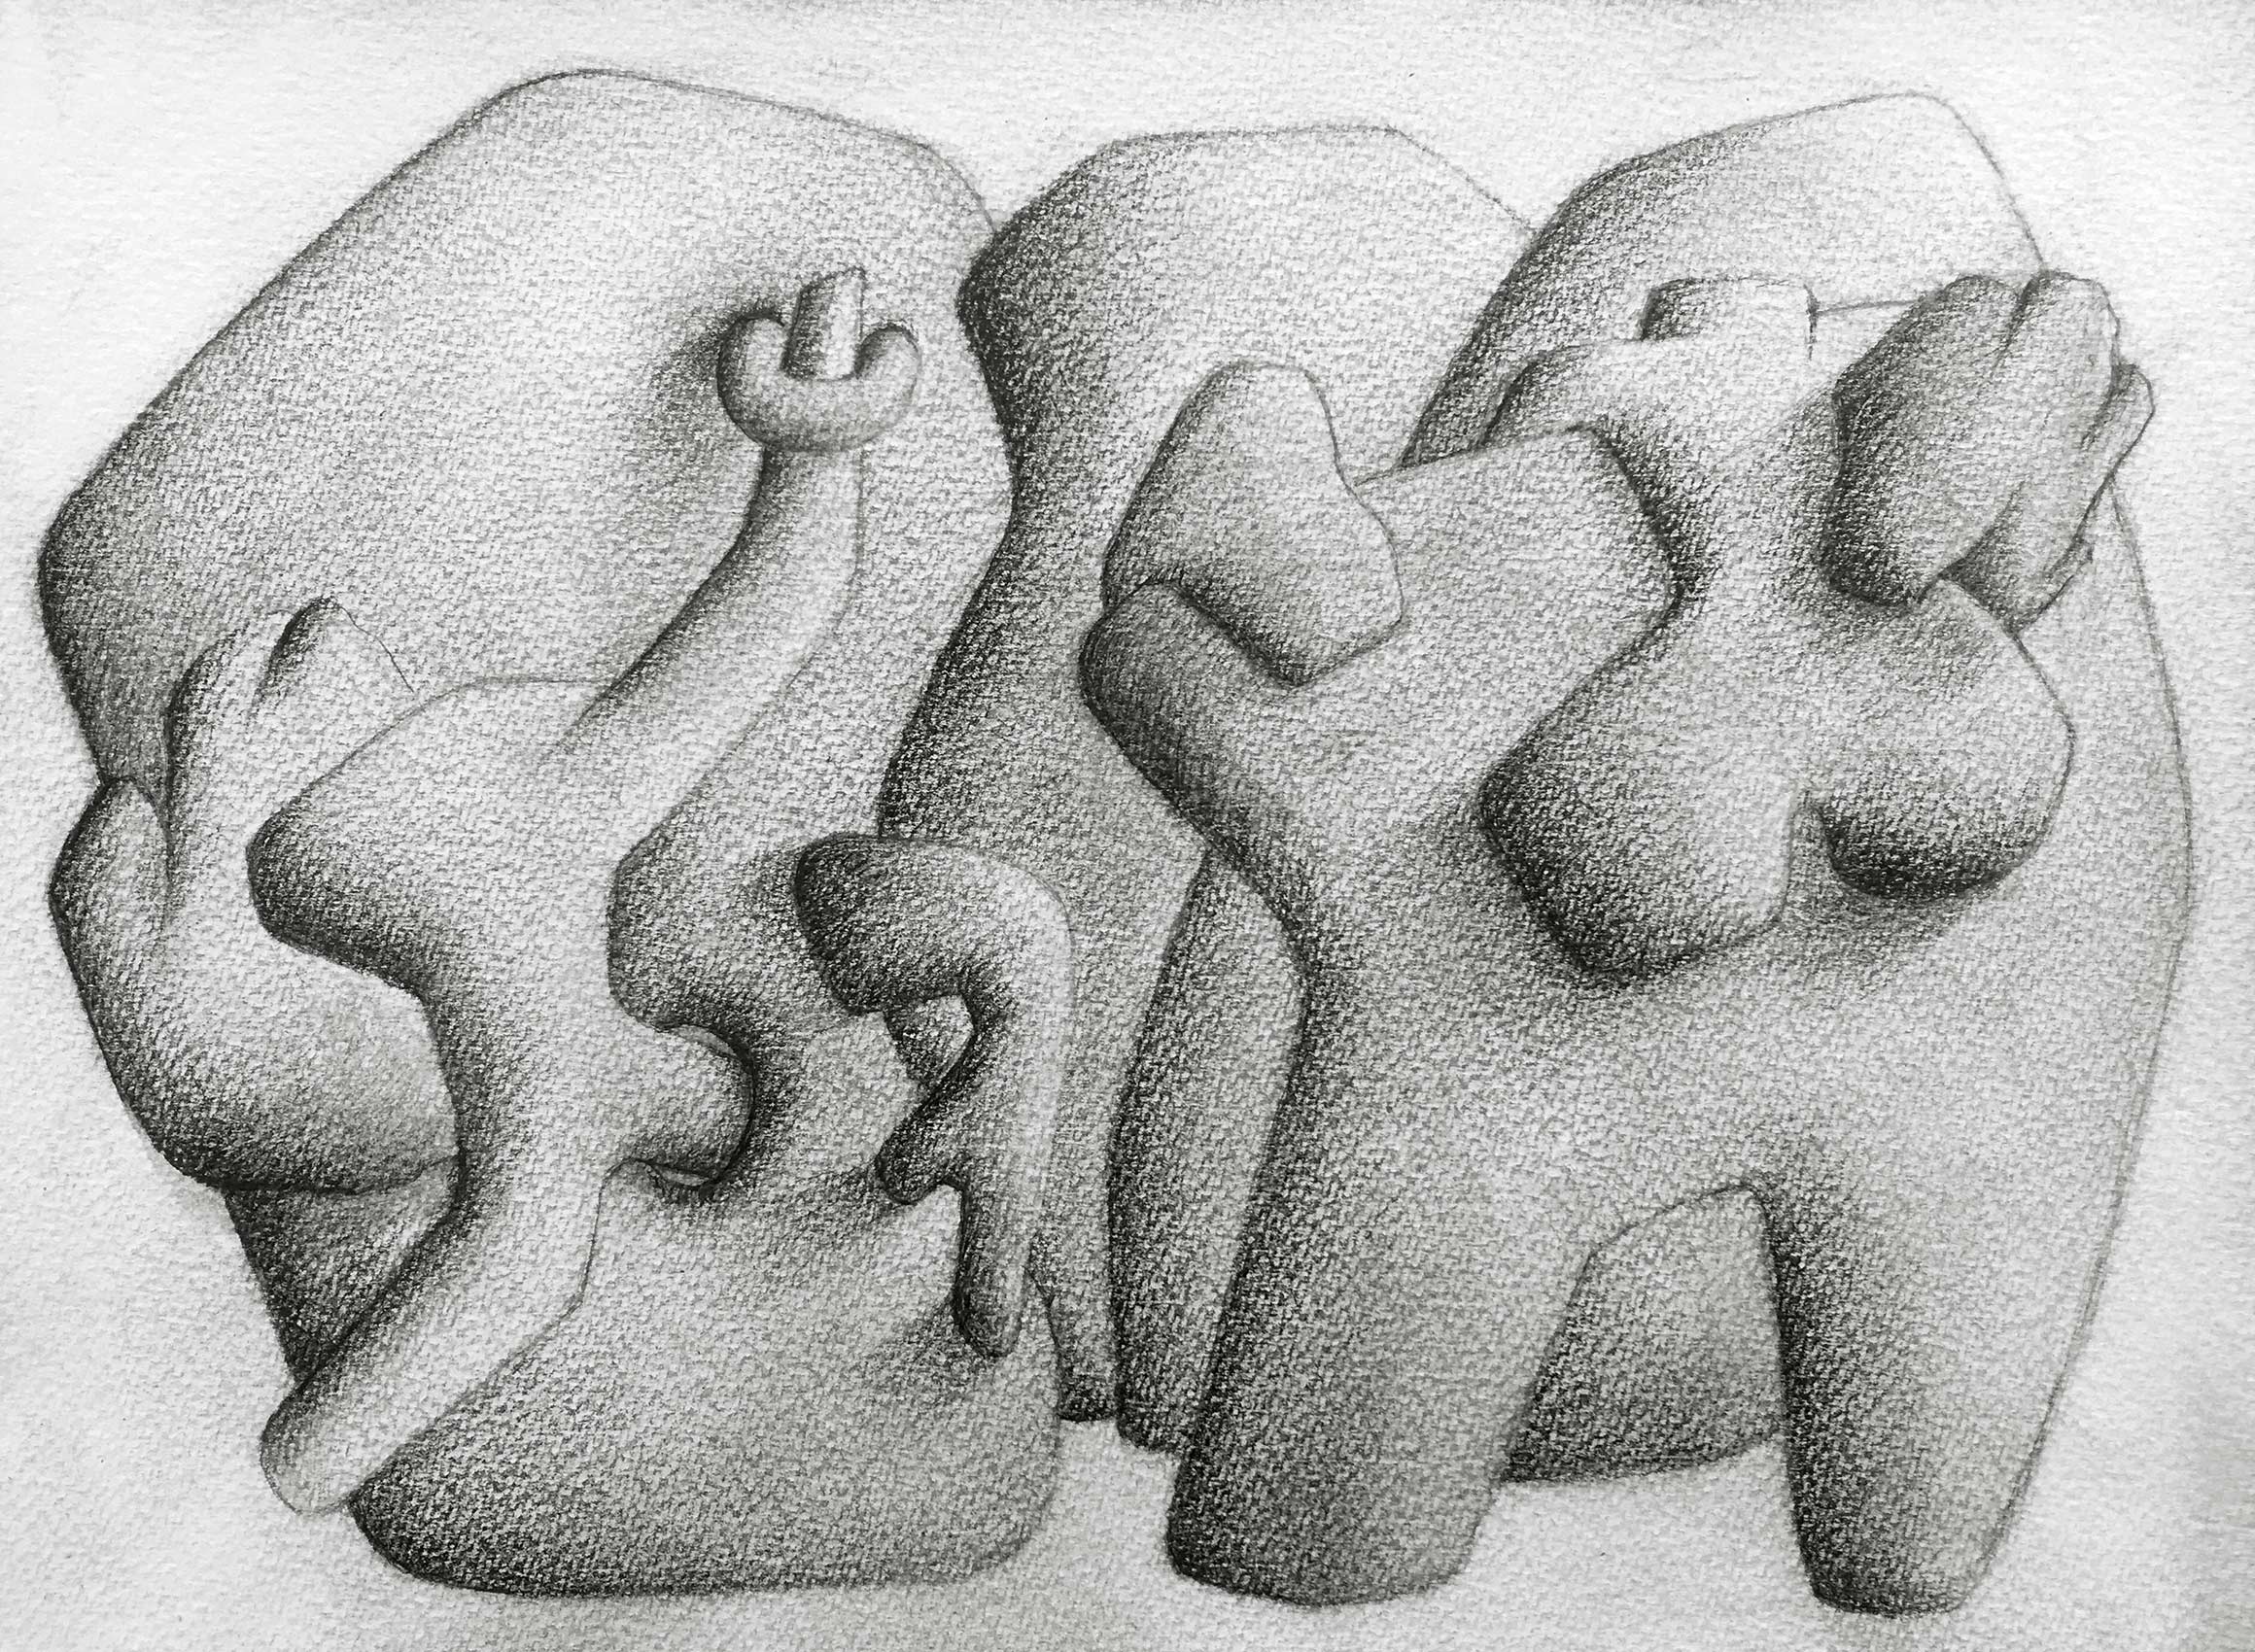 [No Title], N°DNT3,  2019, Pencil on paper, 24cm by 32cm, 2019 ©Pascal Demeester